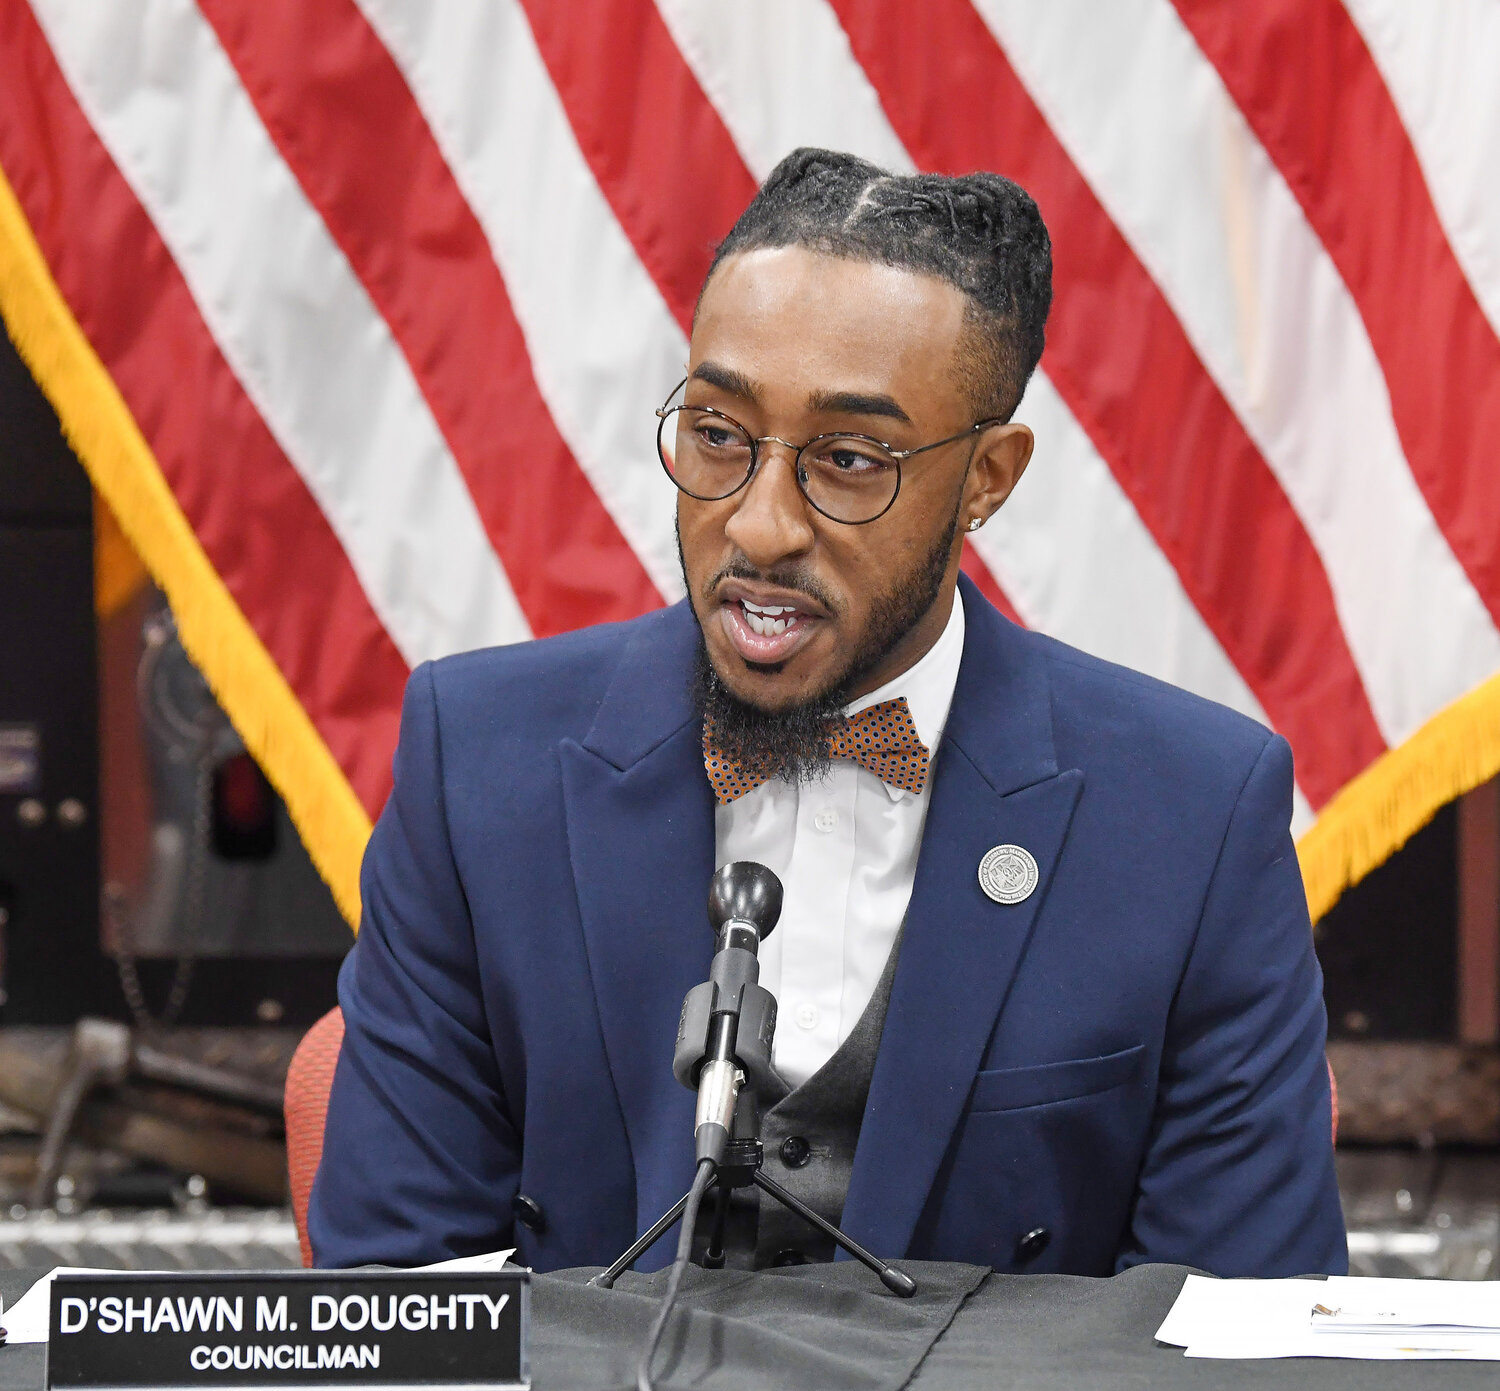 District 2 Councilman D'Shawn Doughty was chose by his colleagues to serve as Council President.